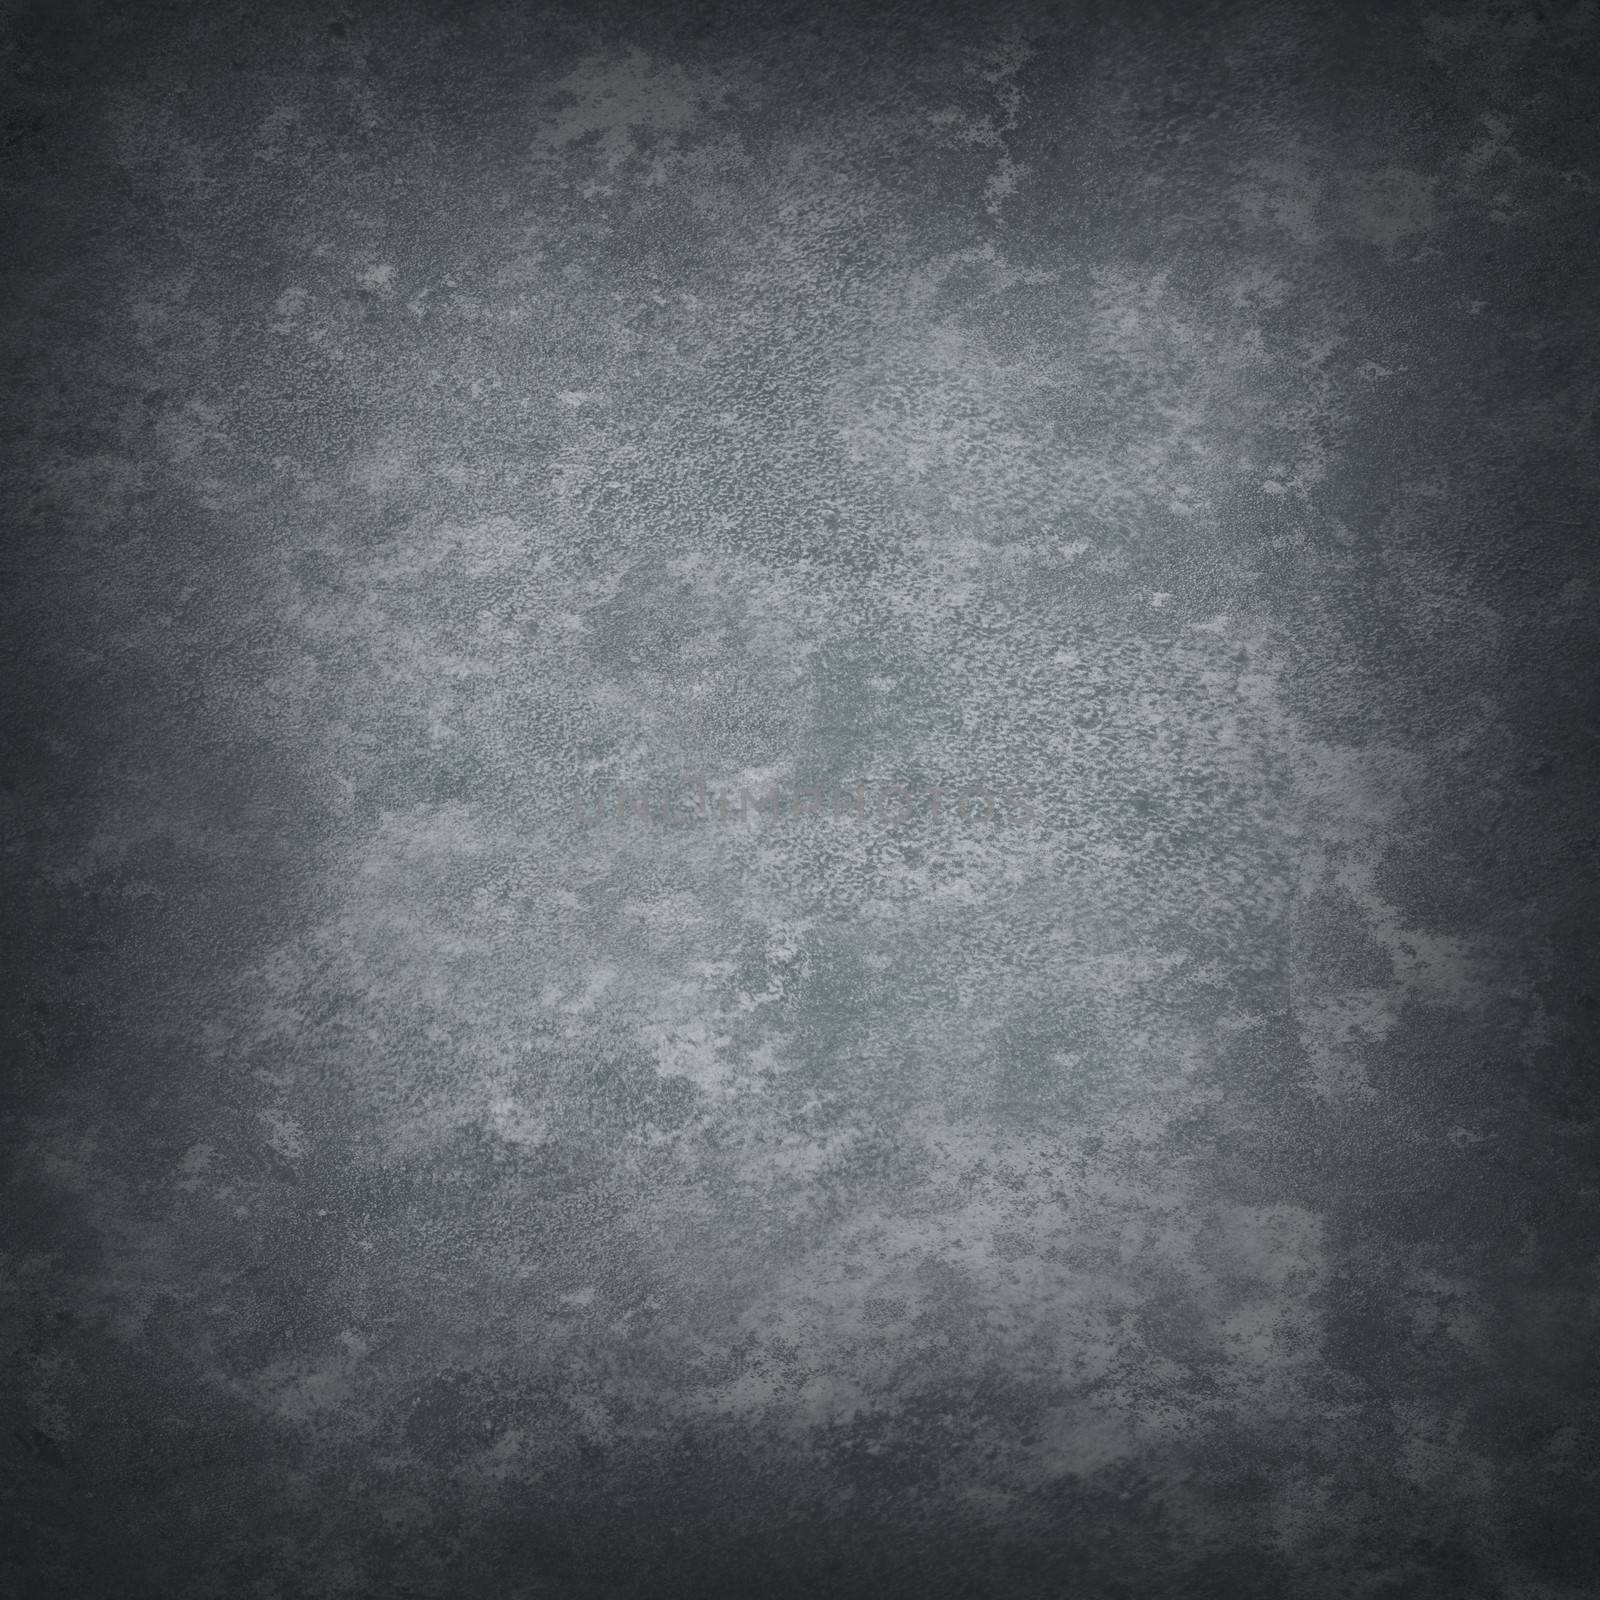 Gray mottled grungy background by Balefire9